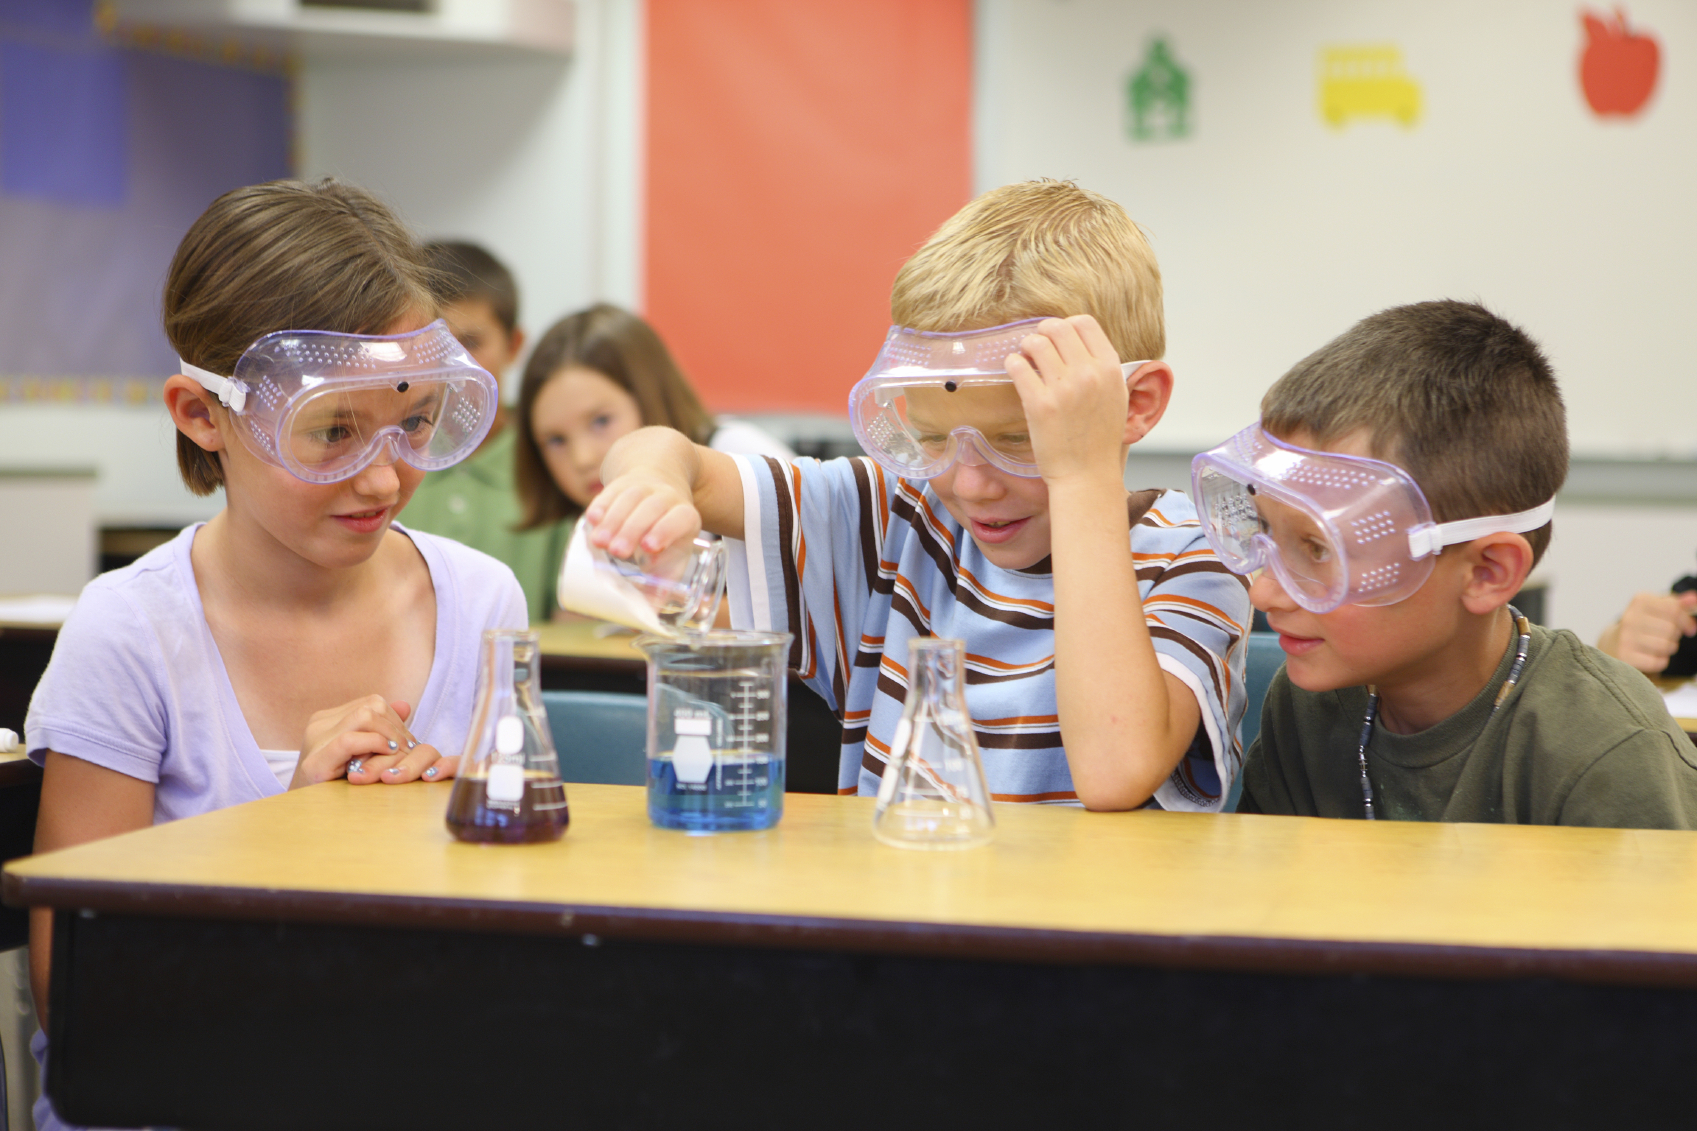 Make Learning Fun with Salt Science Experiments